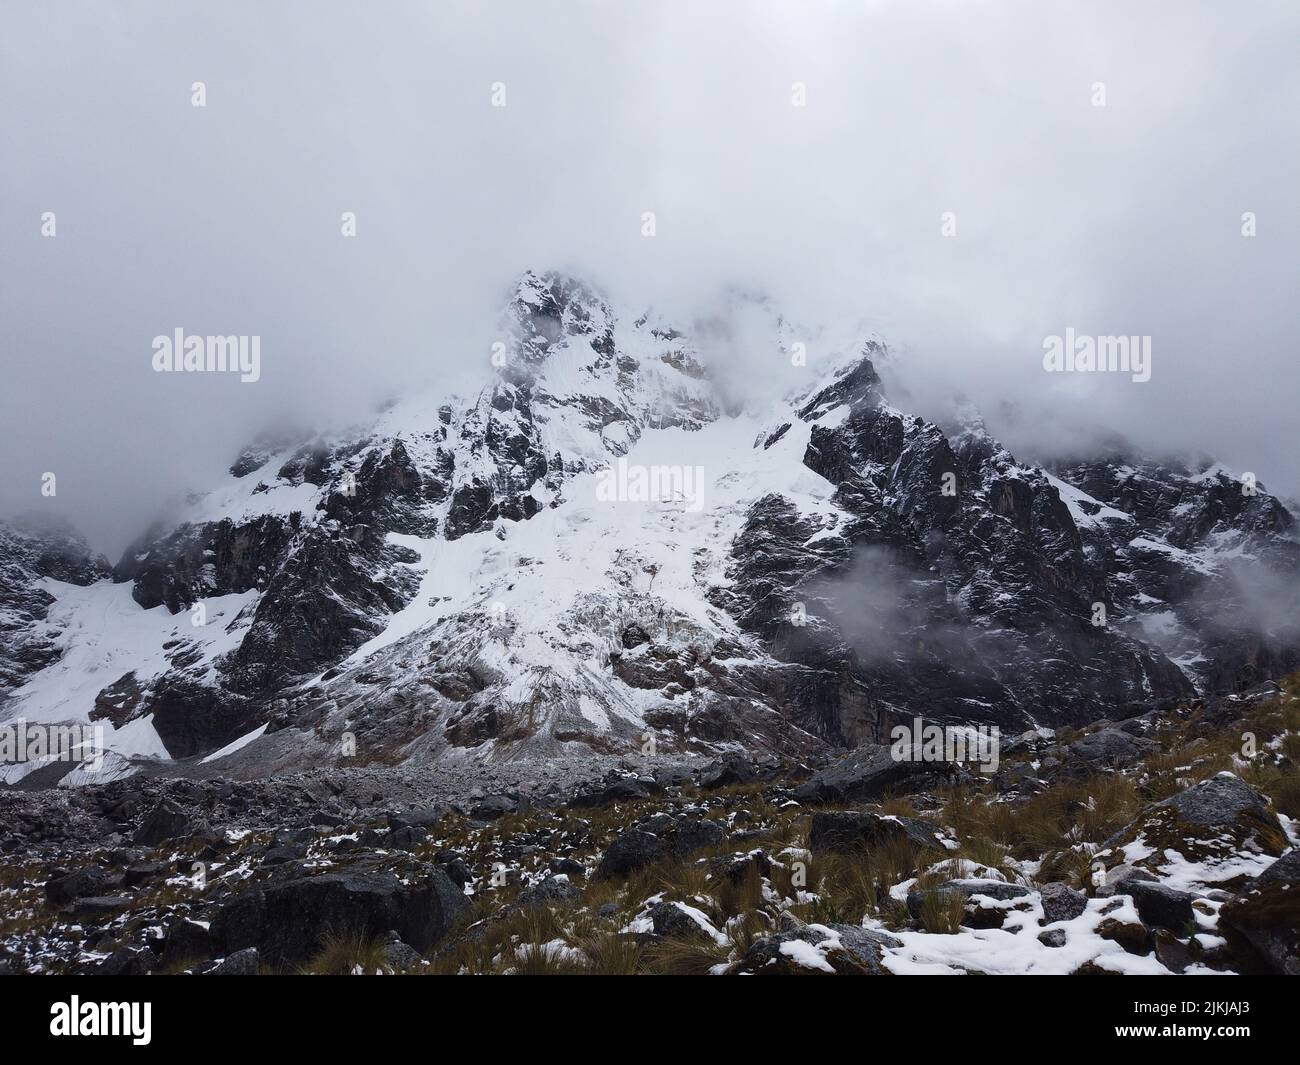 A scenic view of a rocky mountain covered with snow under a cloudy sky Stock Photo